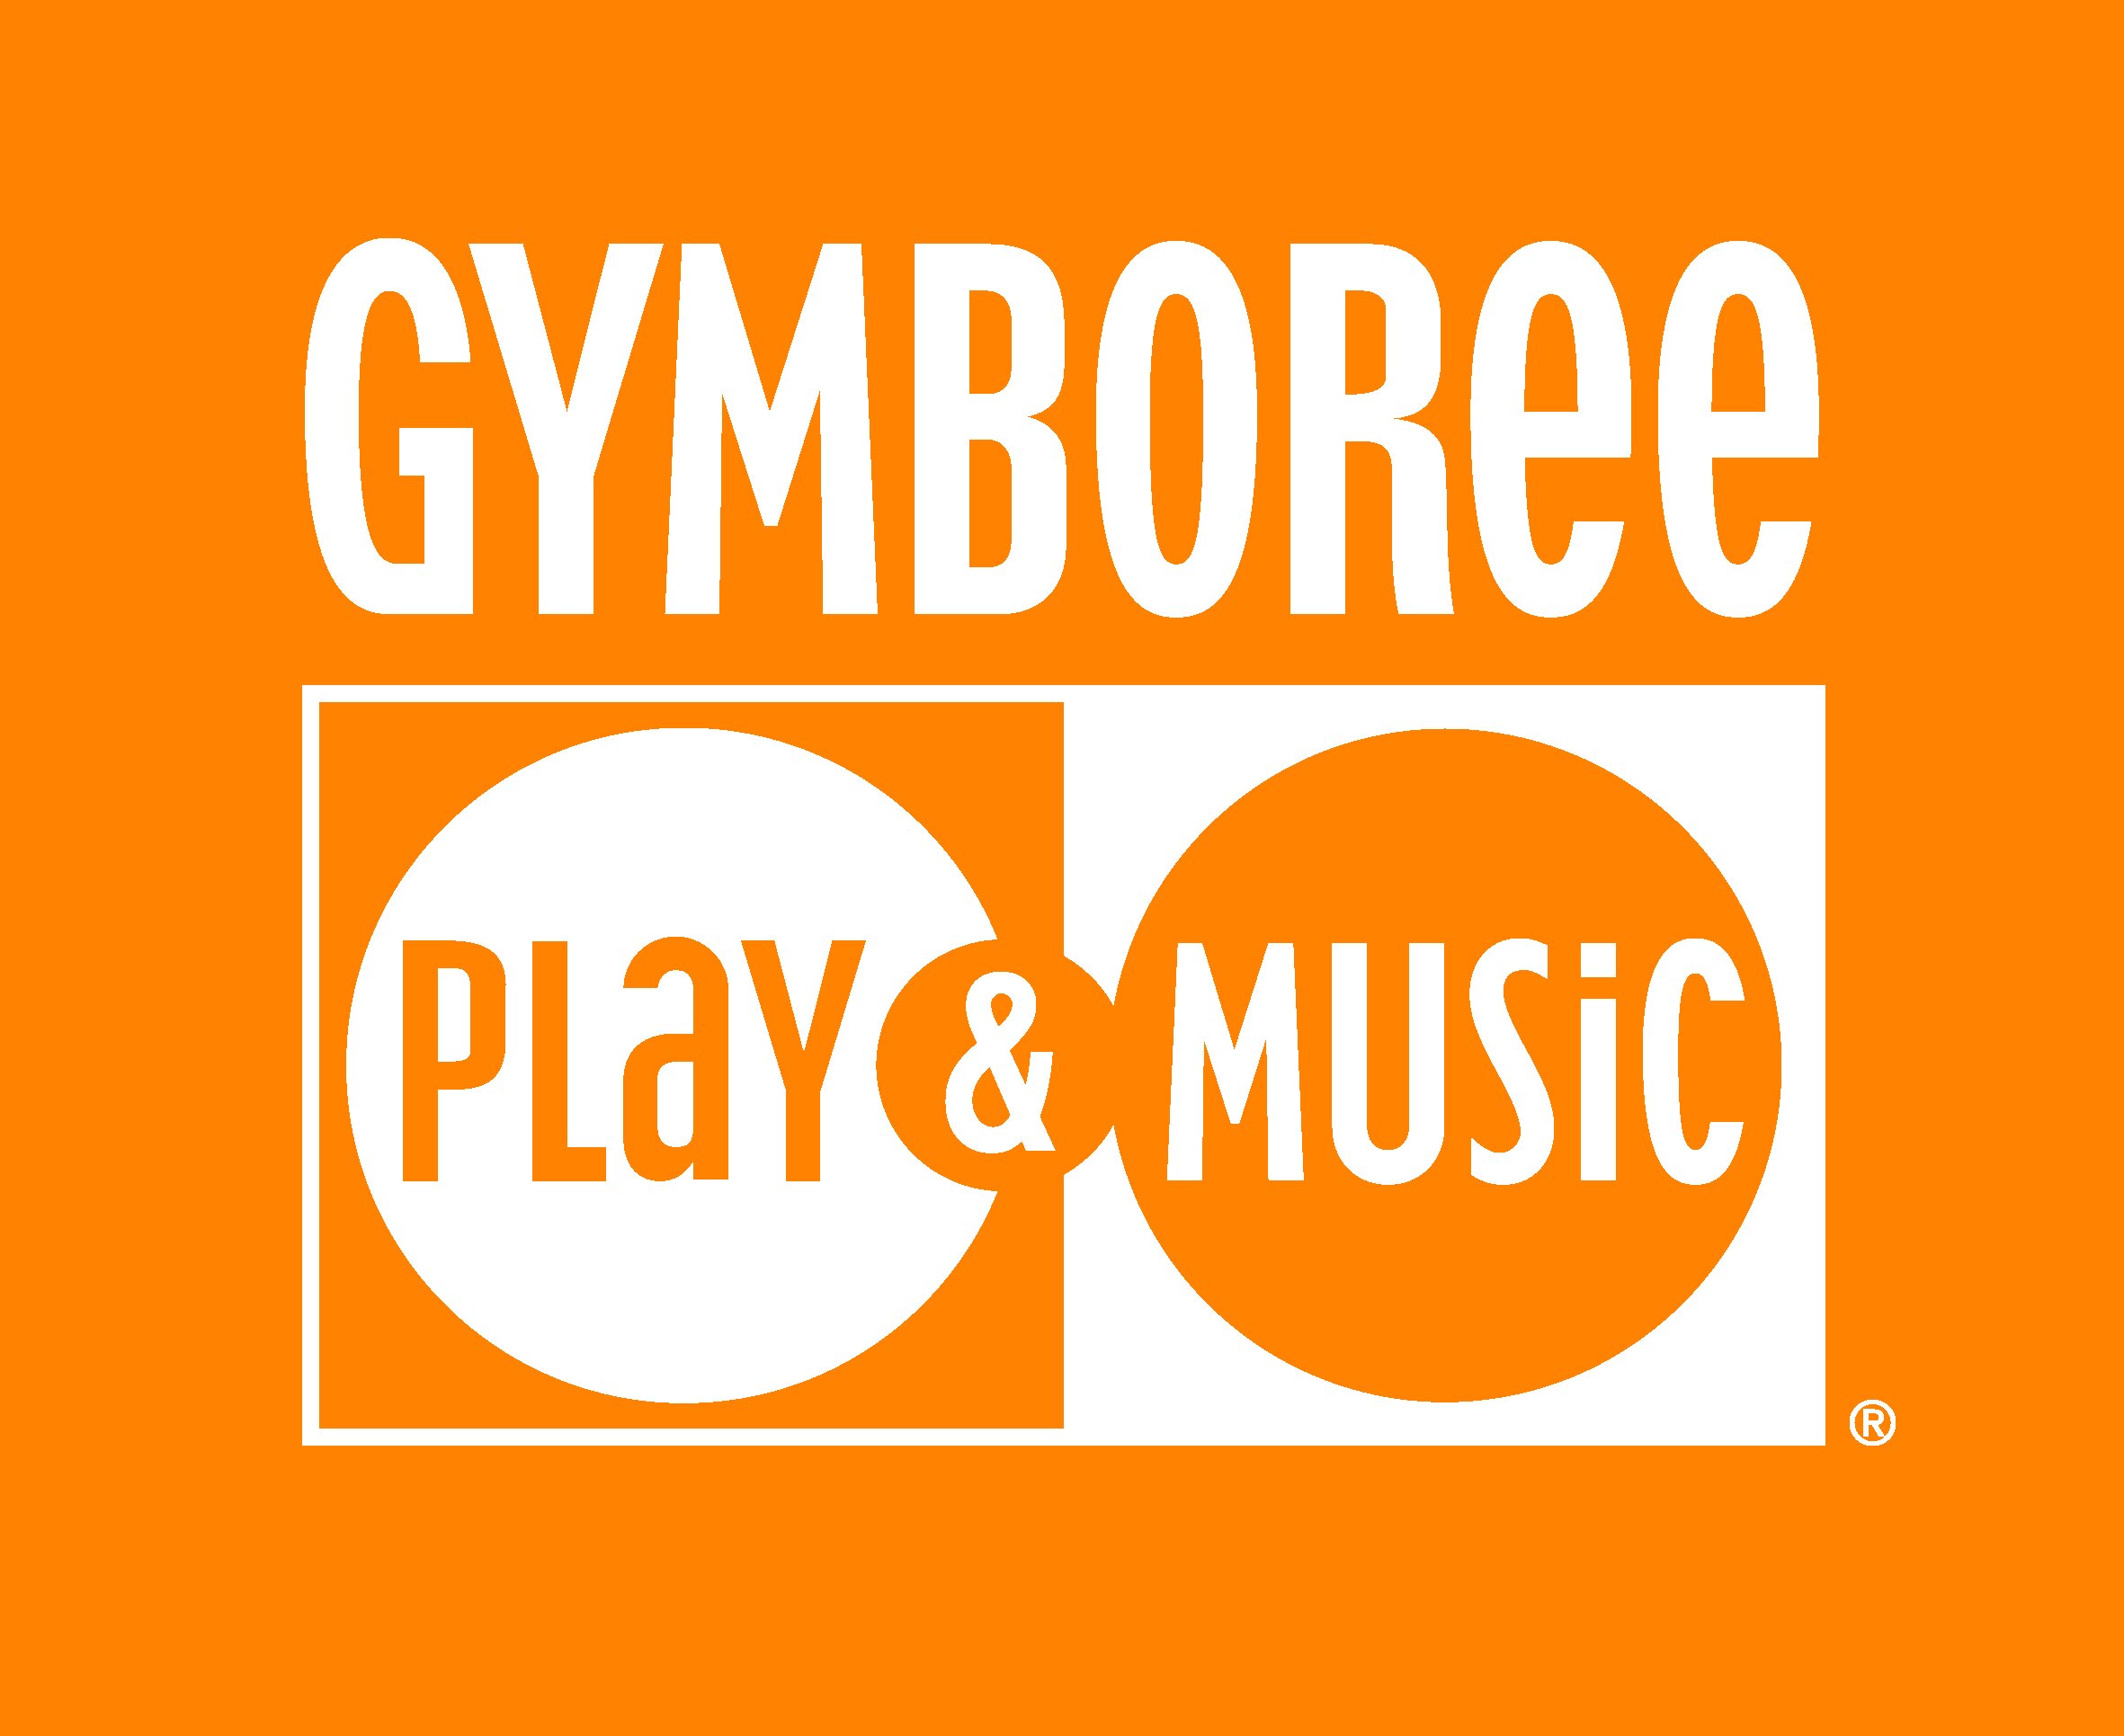 The Official Twitter for Gymboree Bayswater, London, UK: Play & Learn classes for under 5s.
Show that you follow us to receive 10% off a retail purchase!